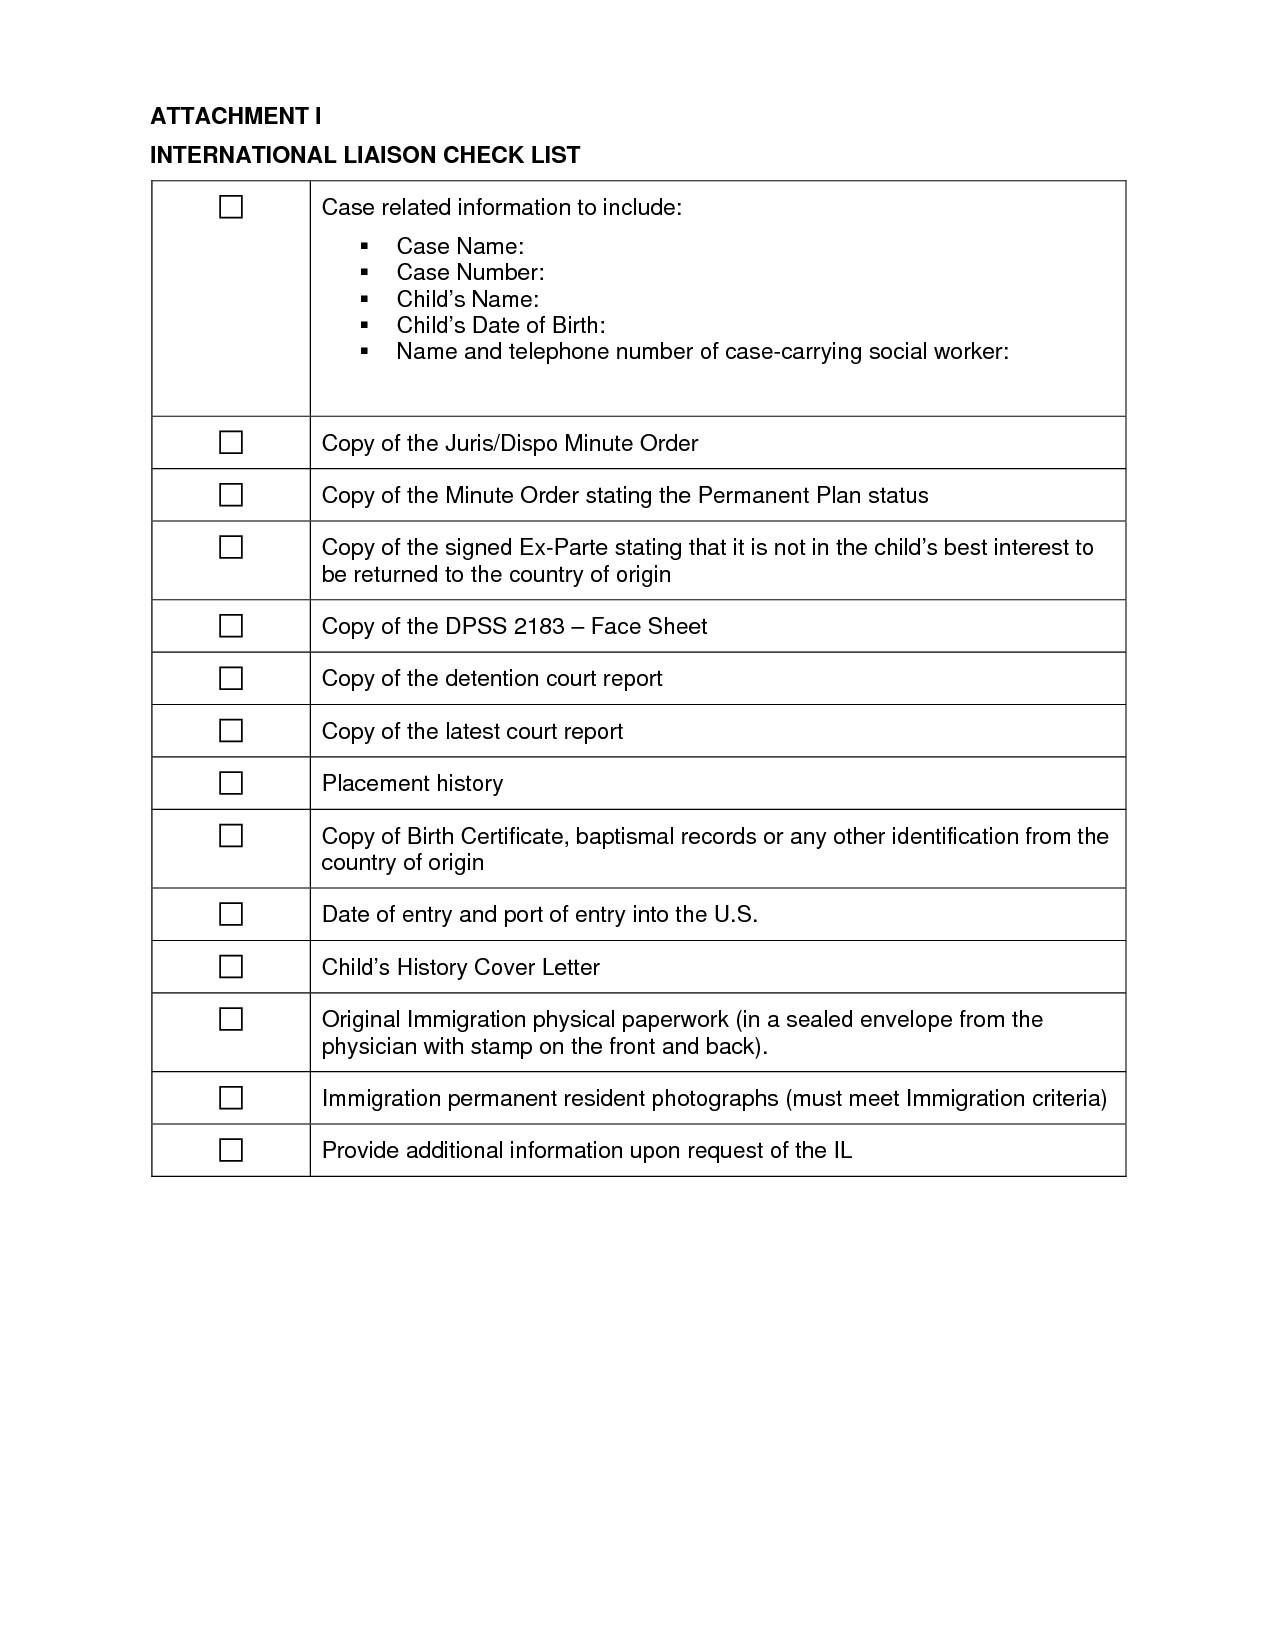 Death Certificate Translation Template Spanish To English Sample